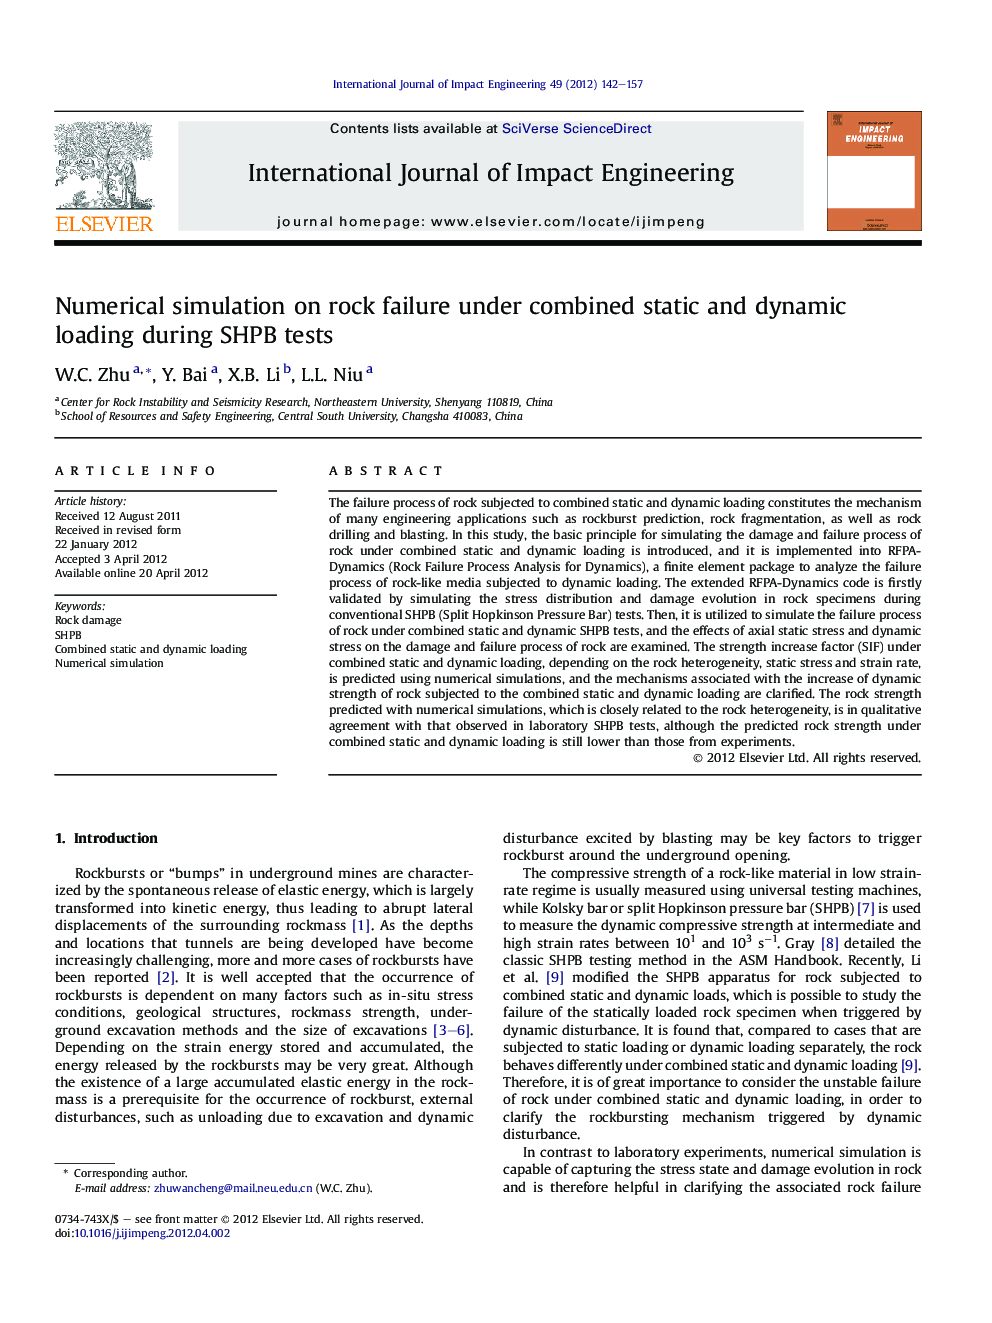 Numerical simulation on rock failure under combined static and dynamic loading during SHPB tests